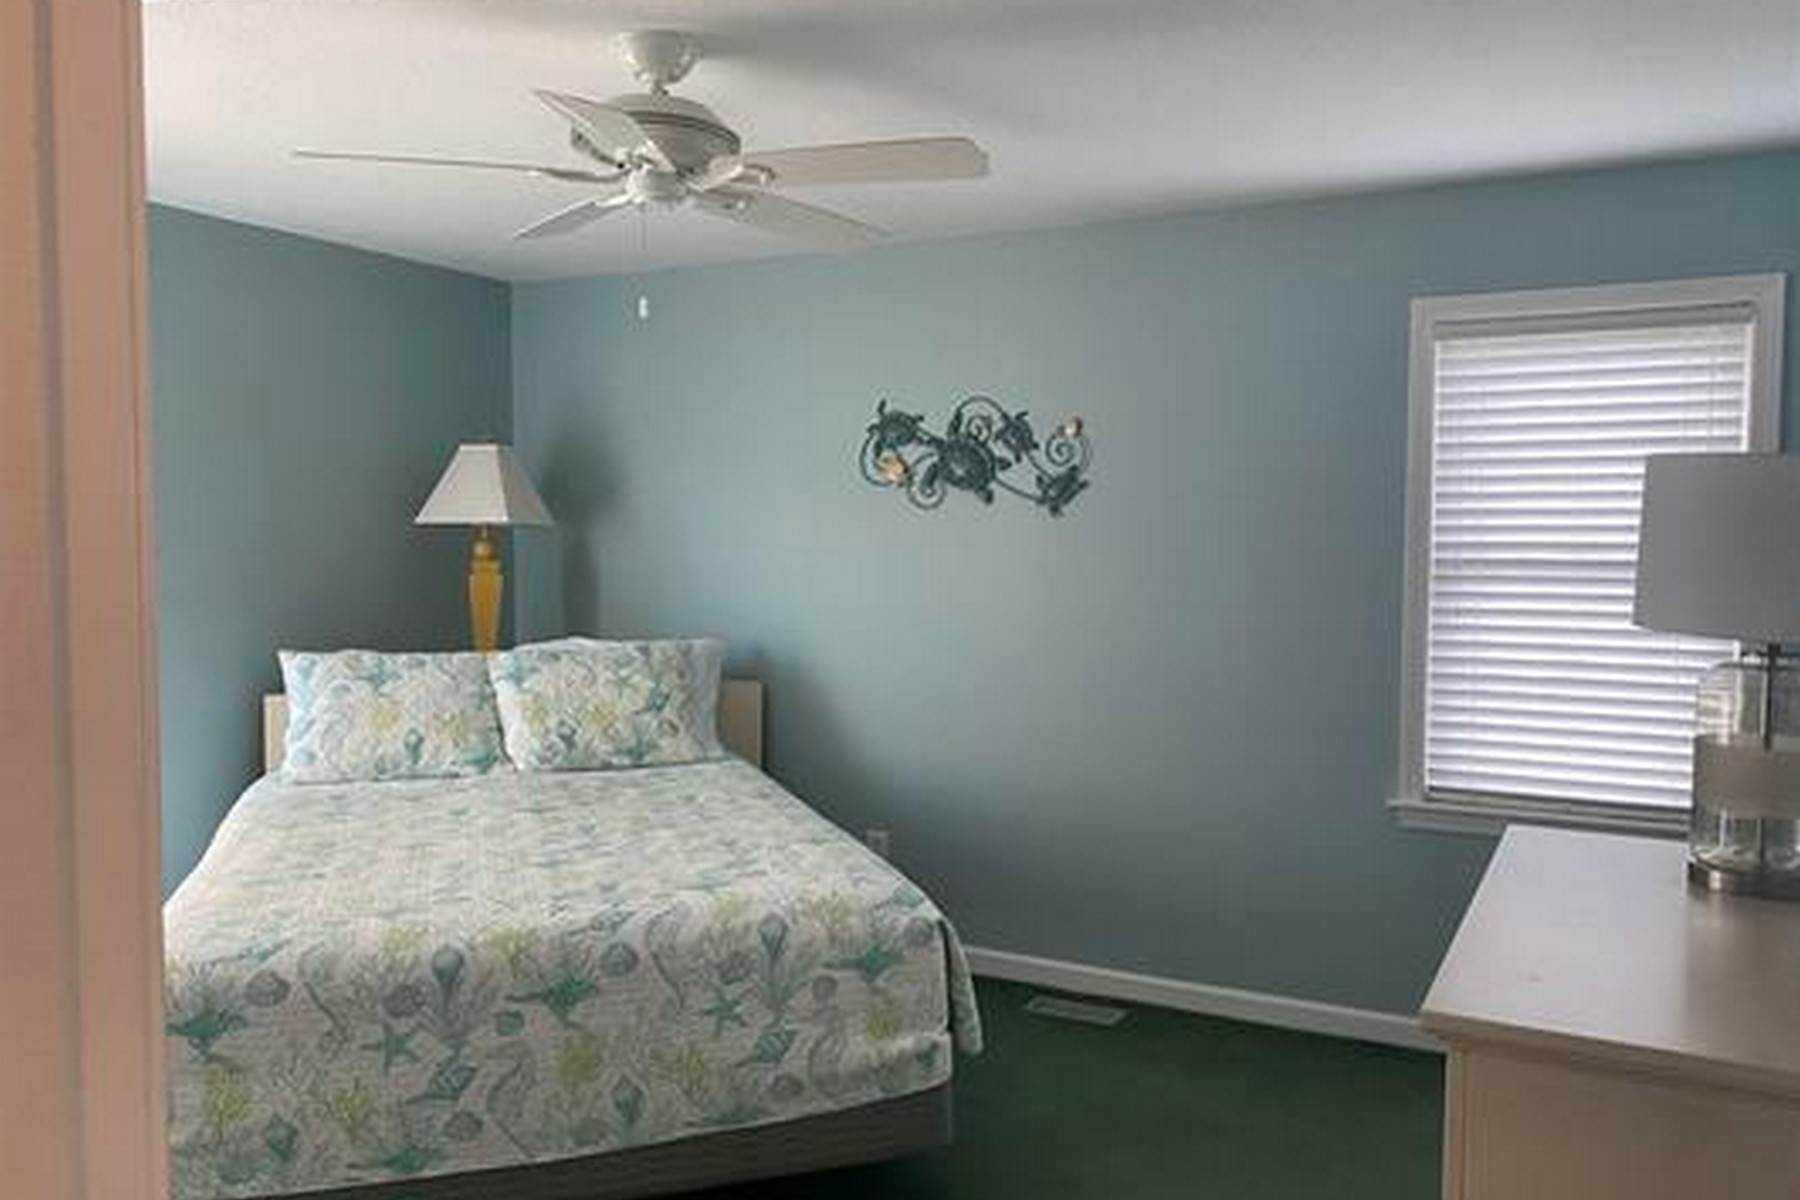 15. Fractional Ownership Property for Sale at Beautiful Semi-Oceanfront Home Fractional Timeshare 144 N Spinnaker Court Duck, North Carolina 27949 United States